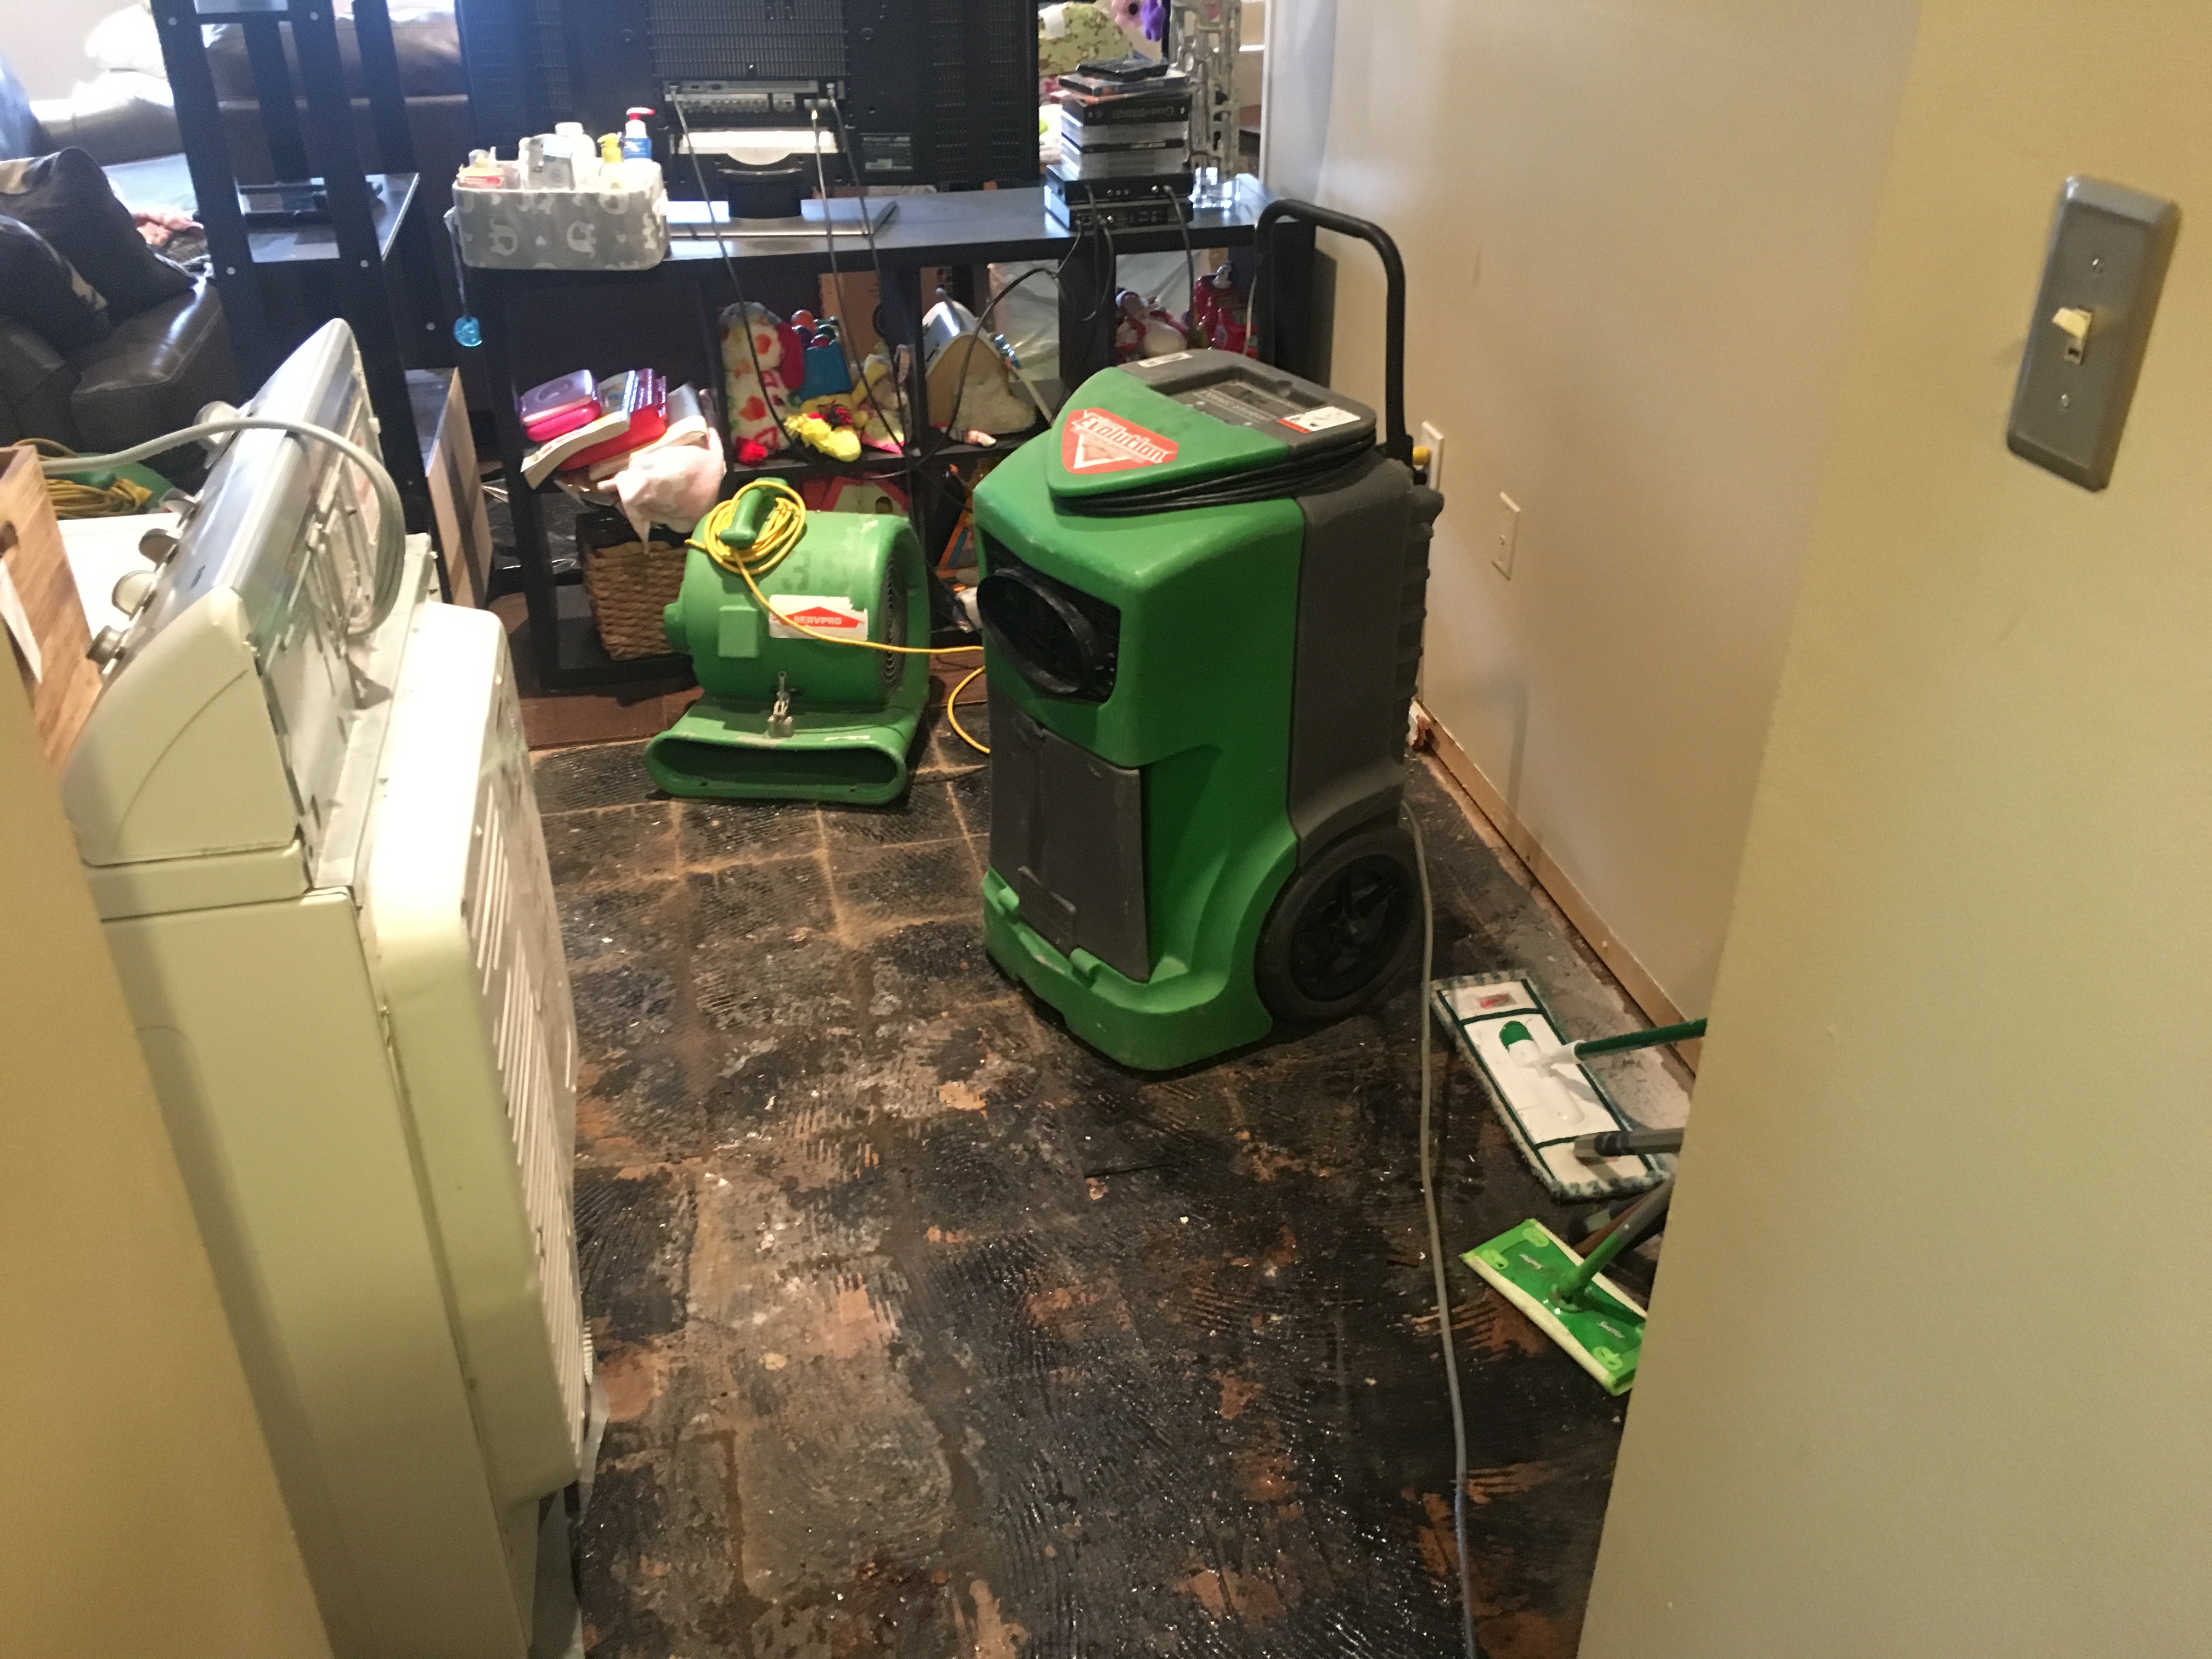 Big or small, SERVPRO is here to help!